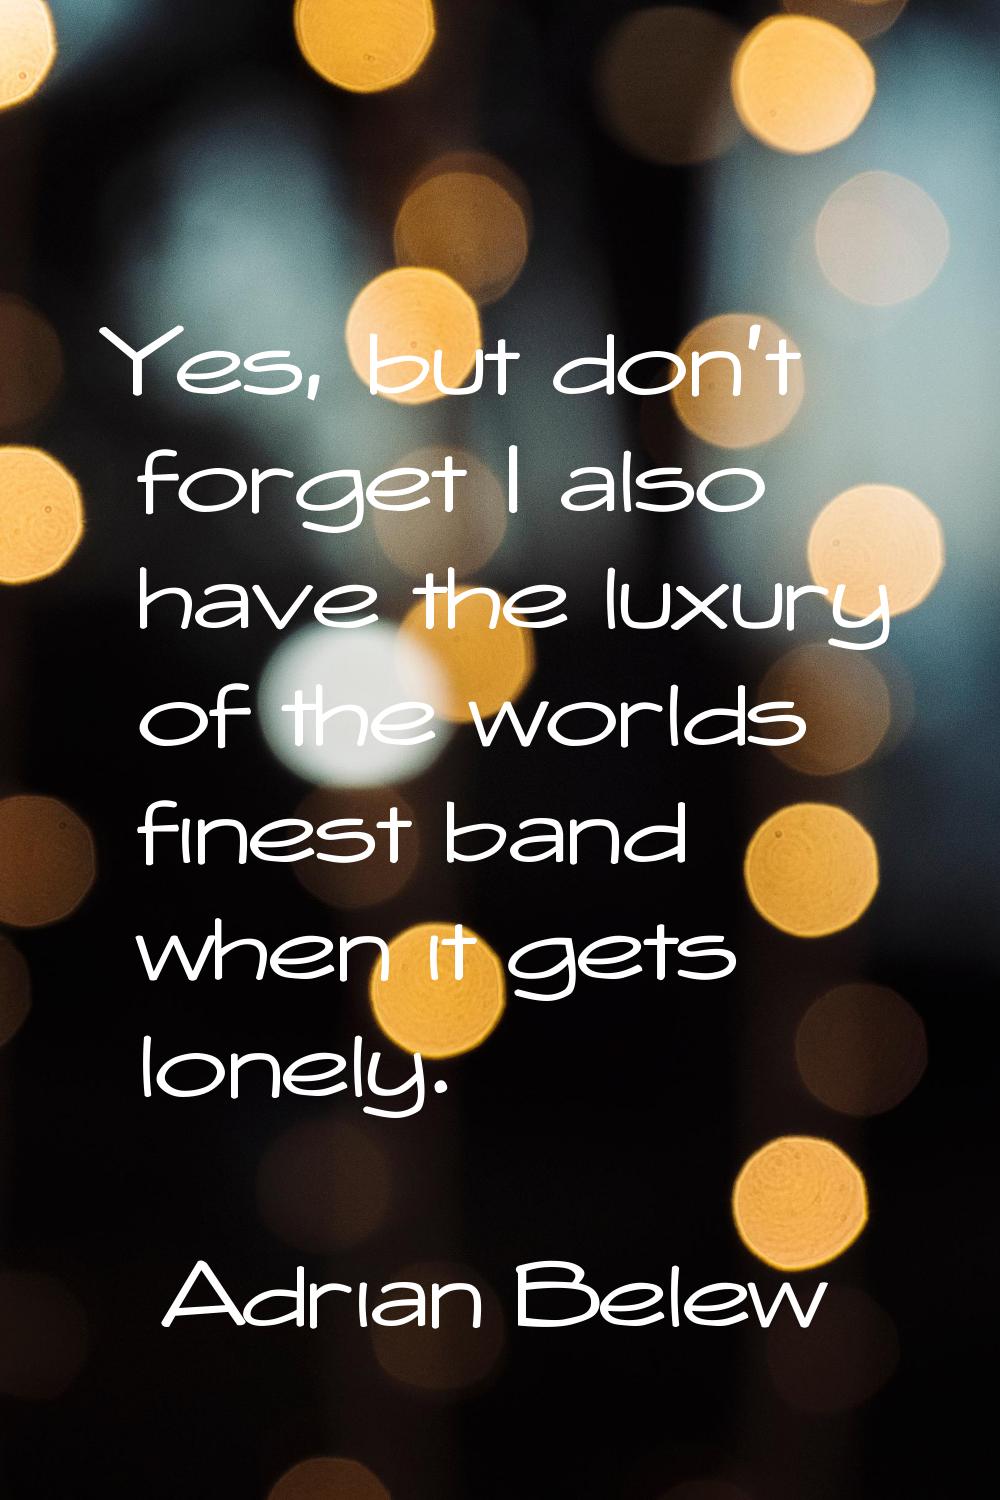 Yes, but don't forget I also have the luxury of the worlds finest band when it gets lonely.